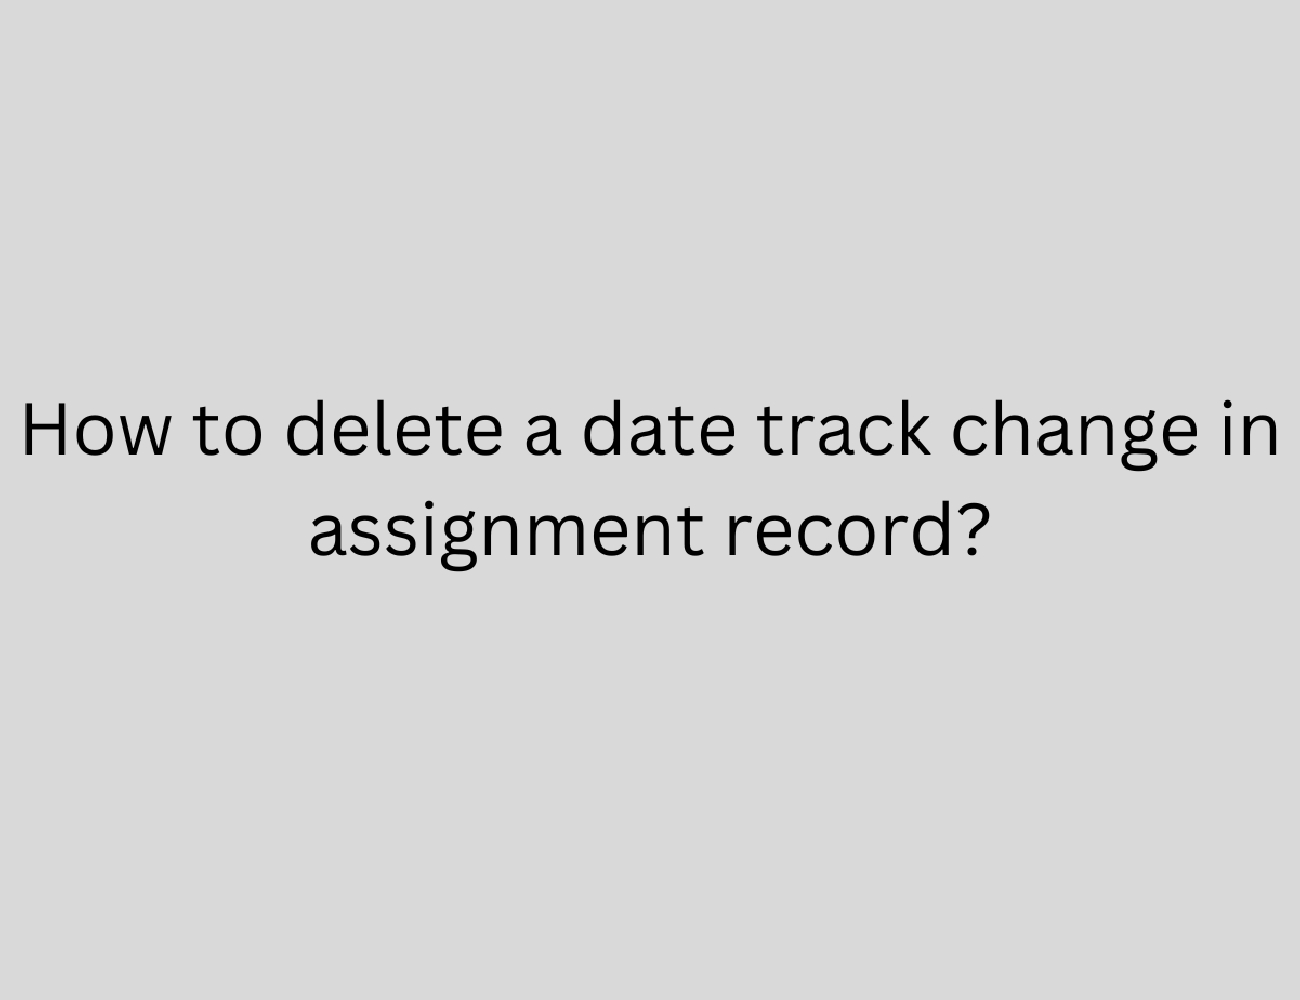 no assignment record exists from date